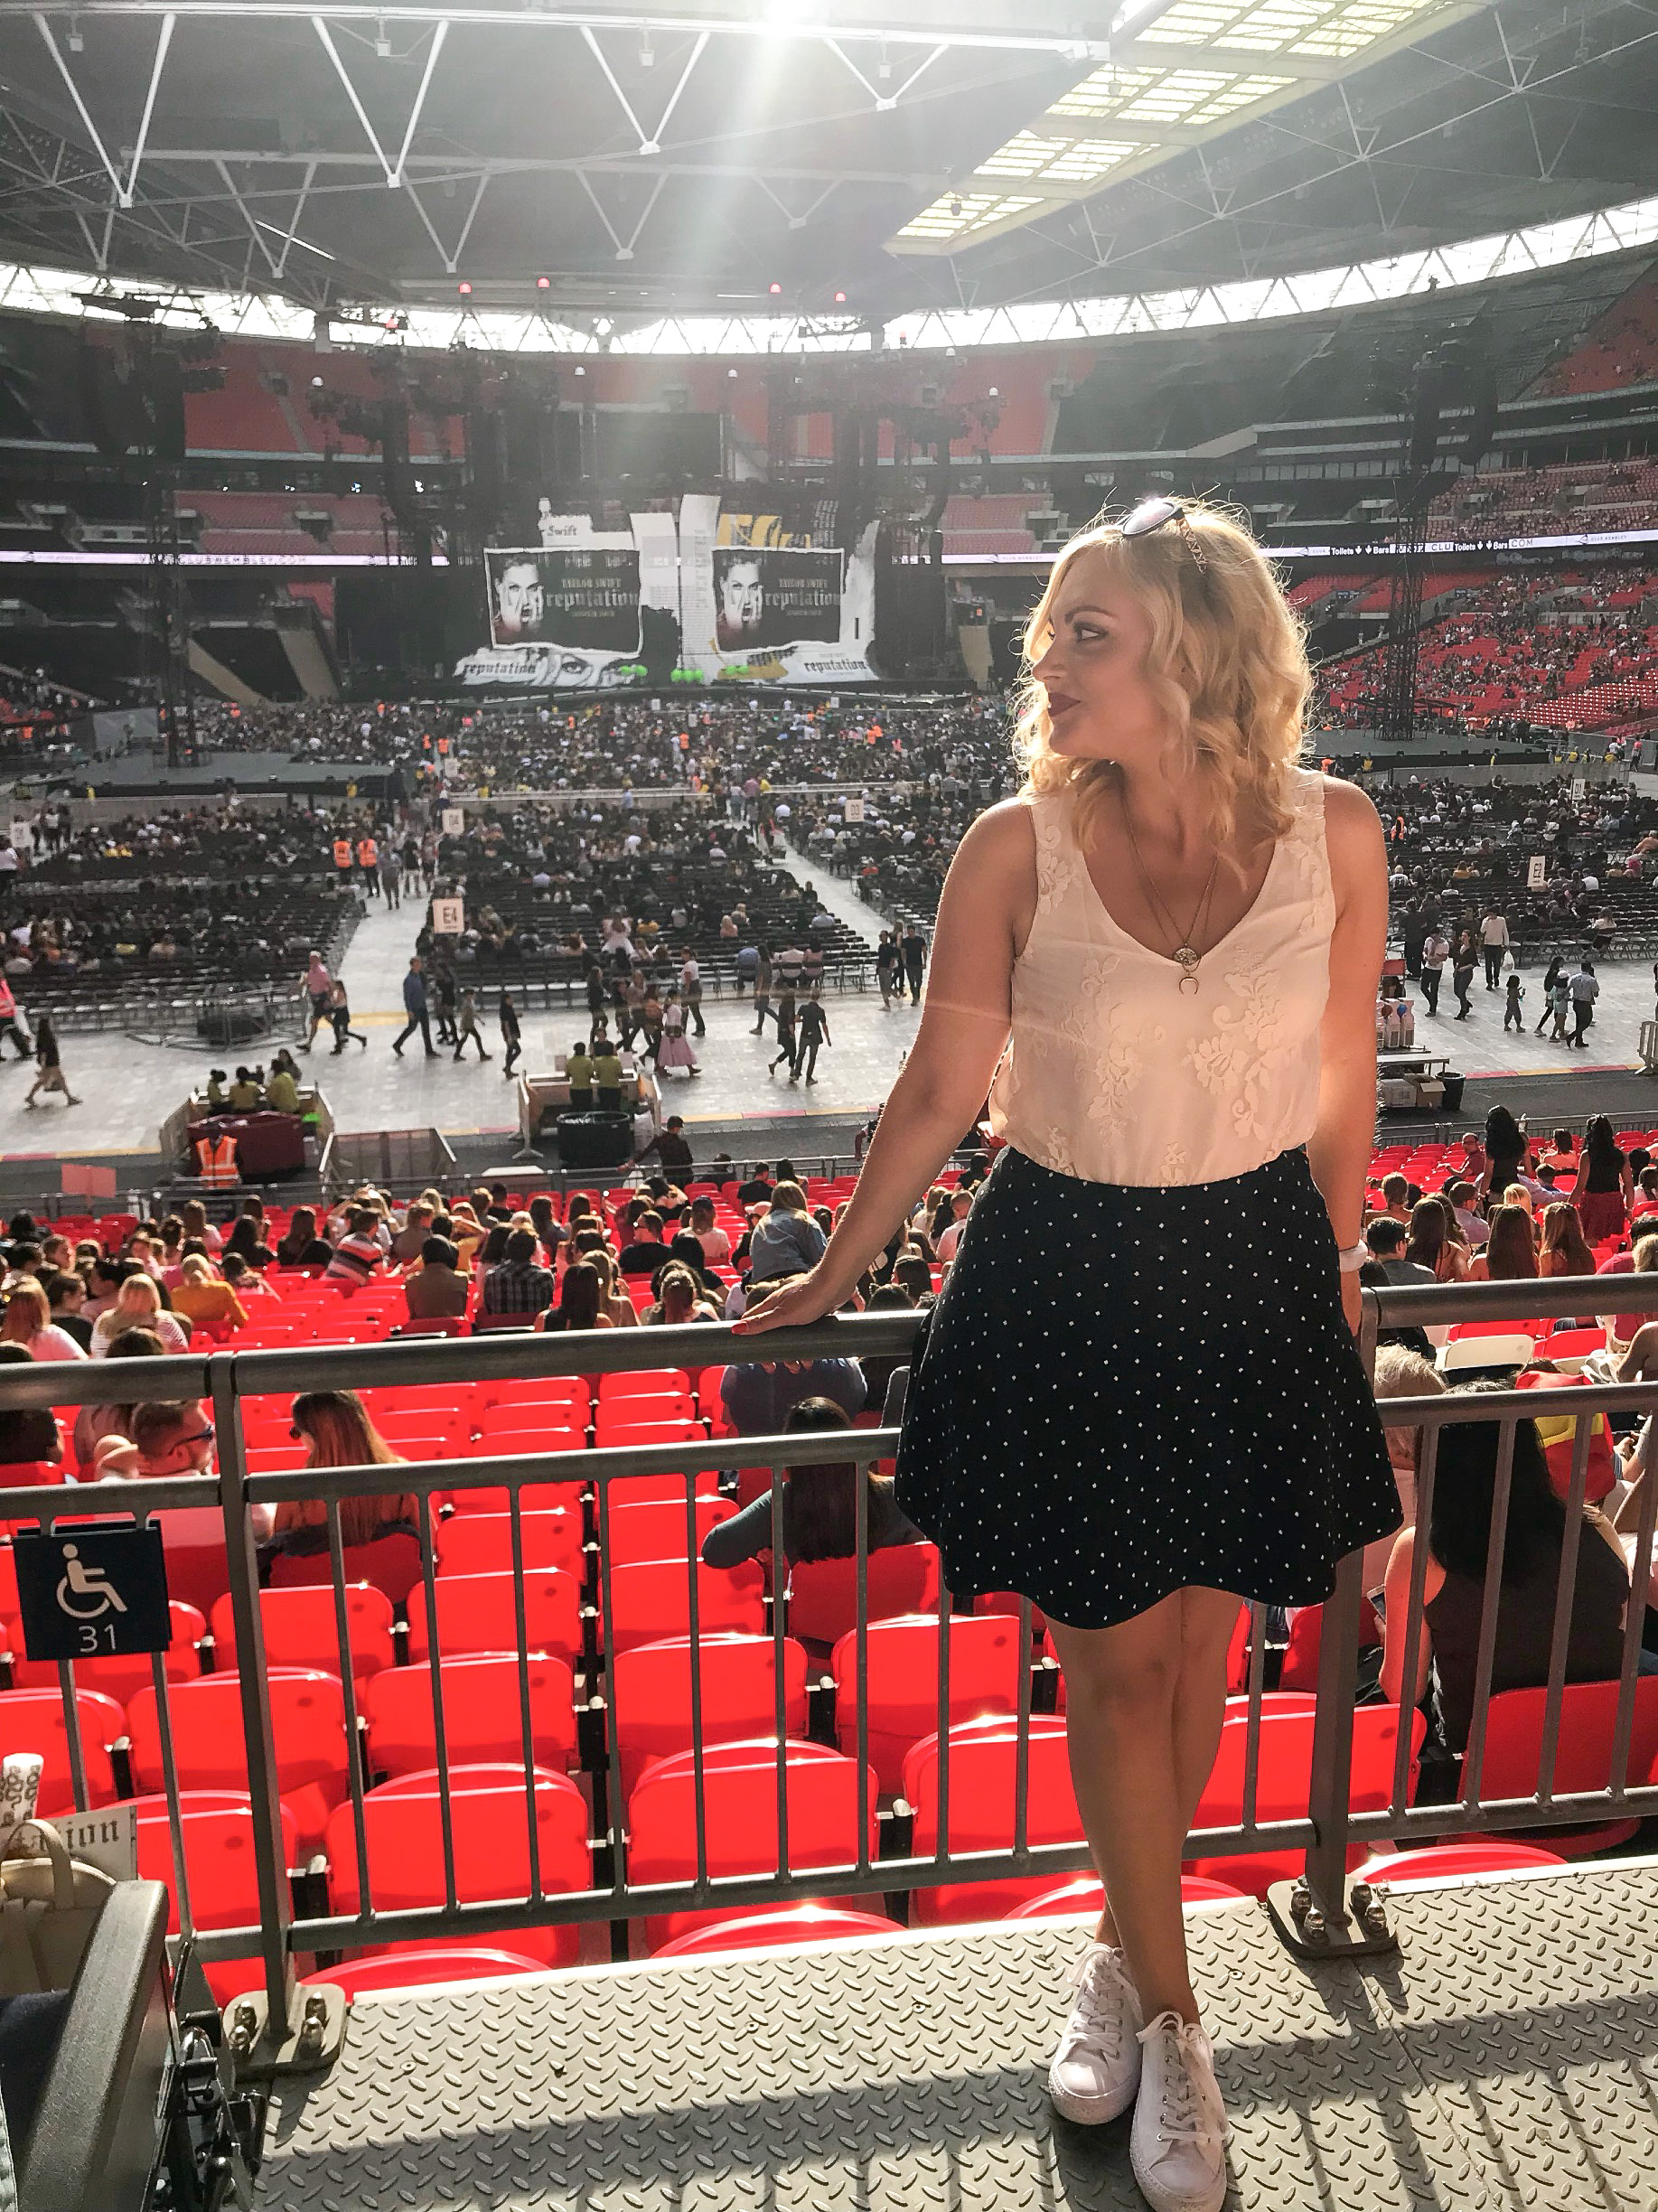 The Reputation Stadium Tour London 2018, Blonde girl stands in front of a barricade in Wembley stadium with Taylor Swift's Reputation Tour Stage behind her. She wears a cream lace camisole & black and white polka dot skirt.